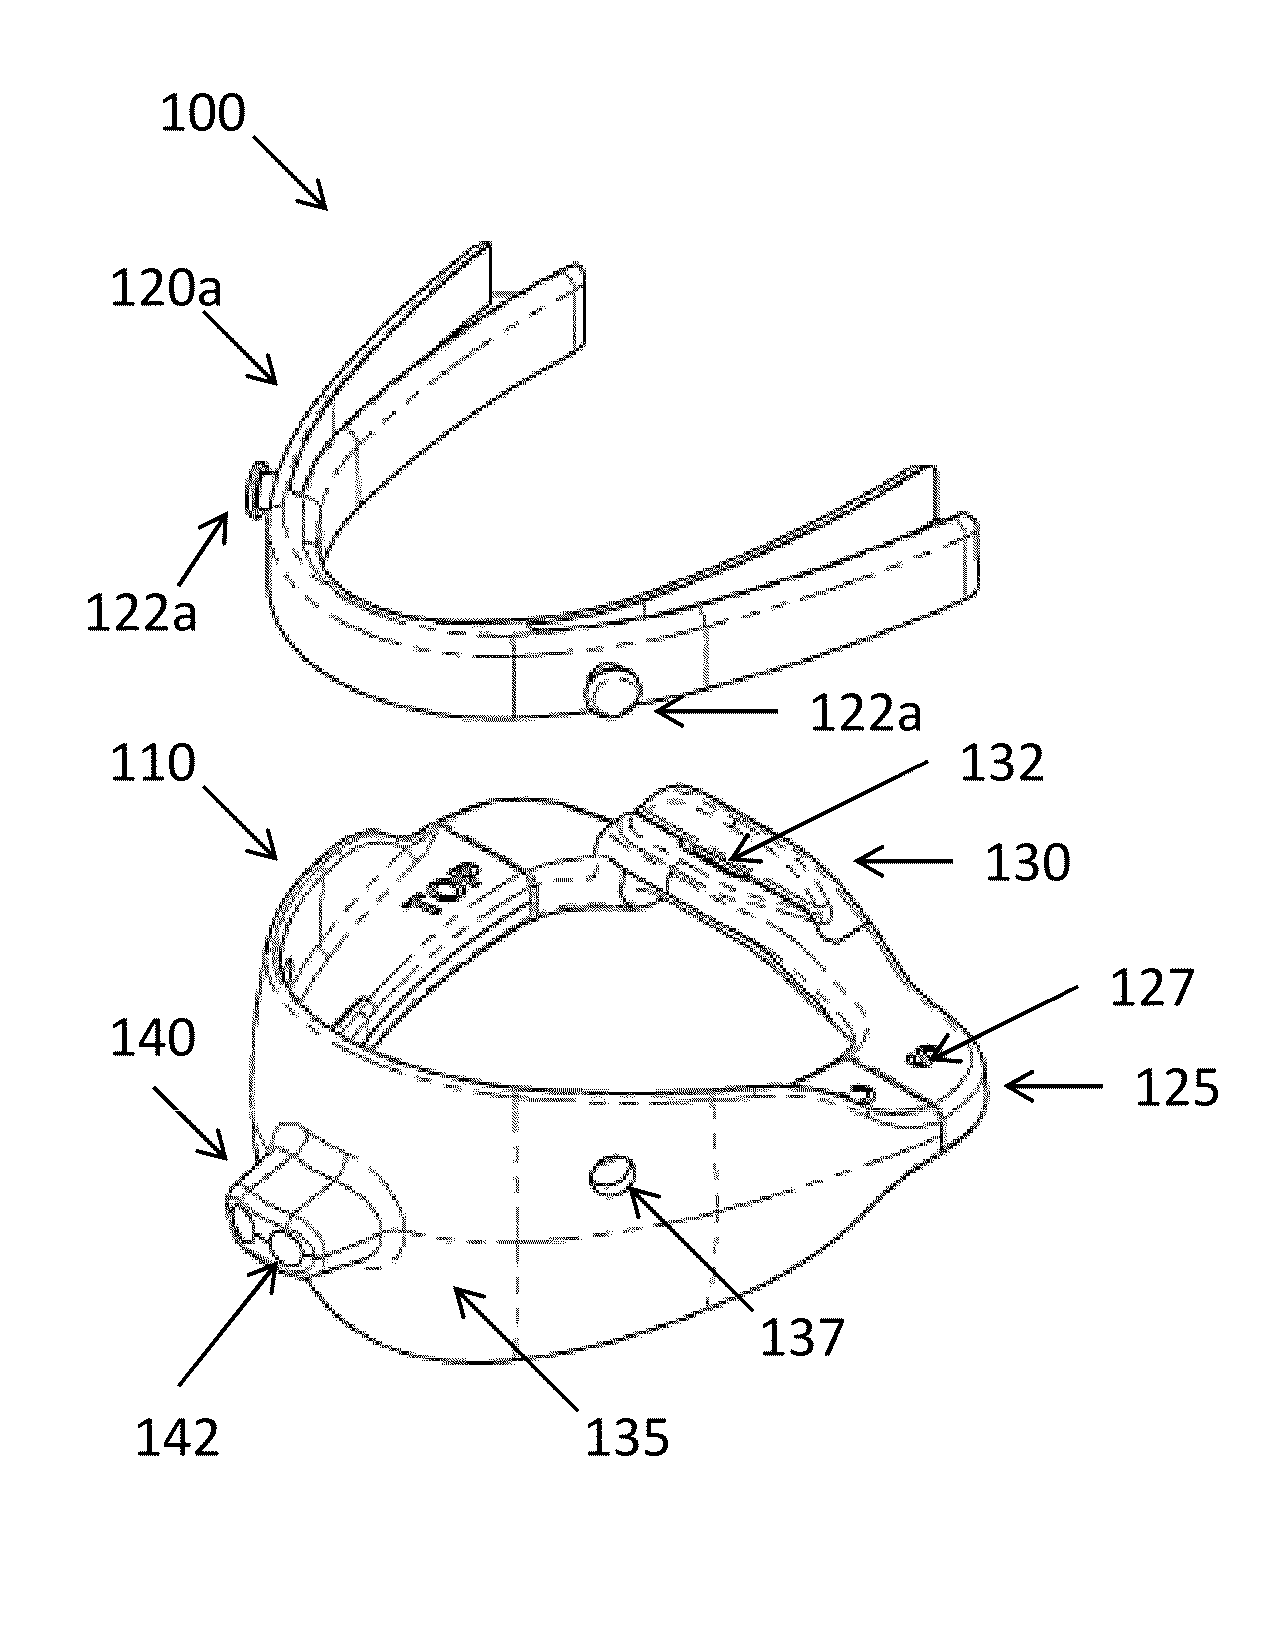 Systems, Devices, and Methods for Retaining Oral Devices for Airway Treatment